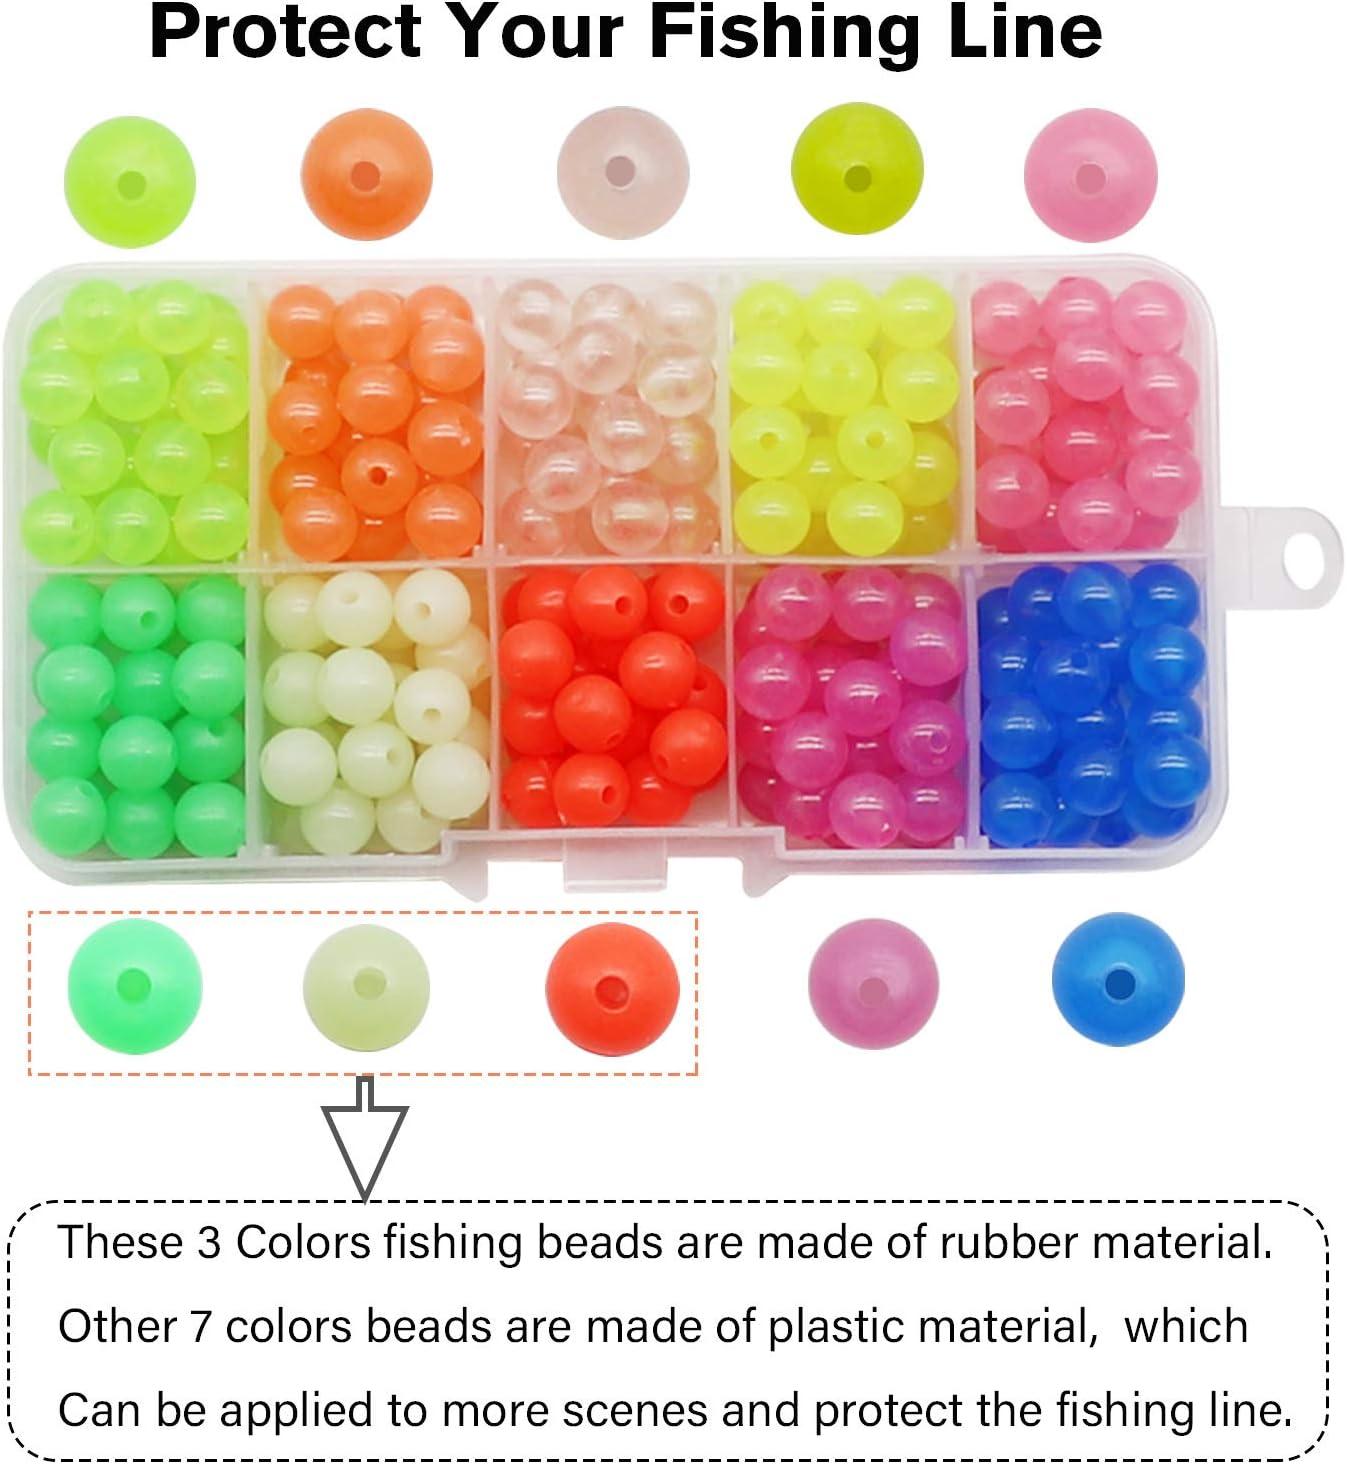 Dovesun Fishing Beads Assorted Beads Fishing Bait Eggs Glow in  Dark/Laser/Colorful/Four Types 0.2in(1000pcs), 0.24in(600pcs),  0.32in(250pcs), 0.39in(120pcs) A-Glow in Dark-0.31in*250pcs